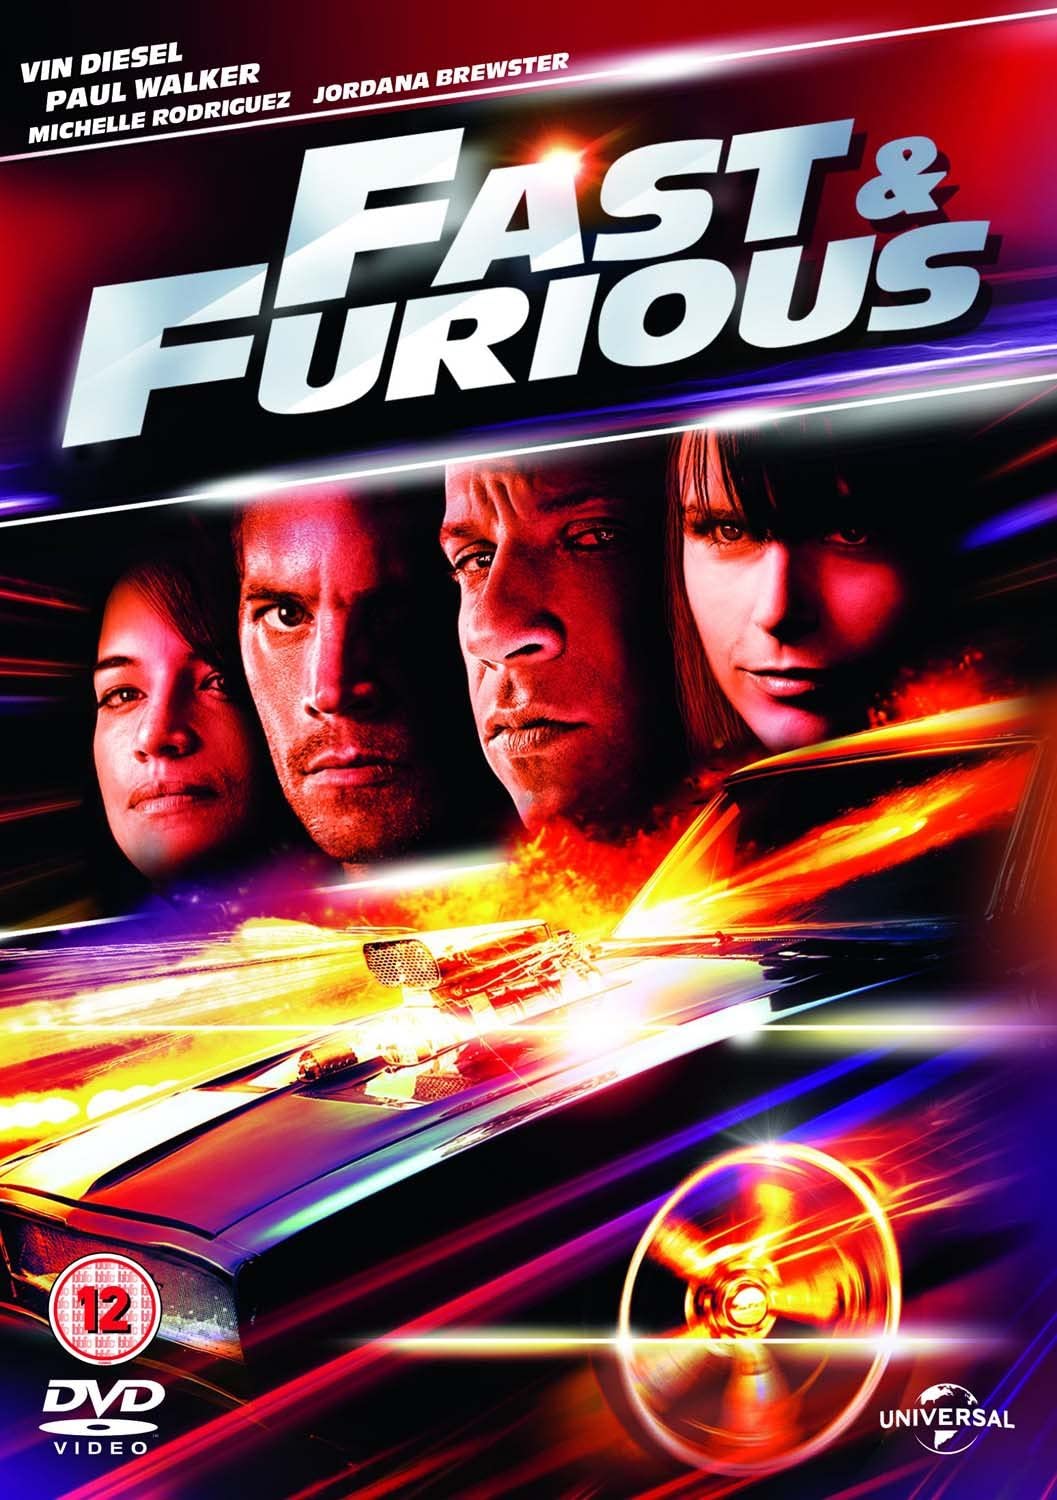 Fast & Furious - Action/Crime [DVD]